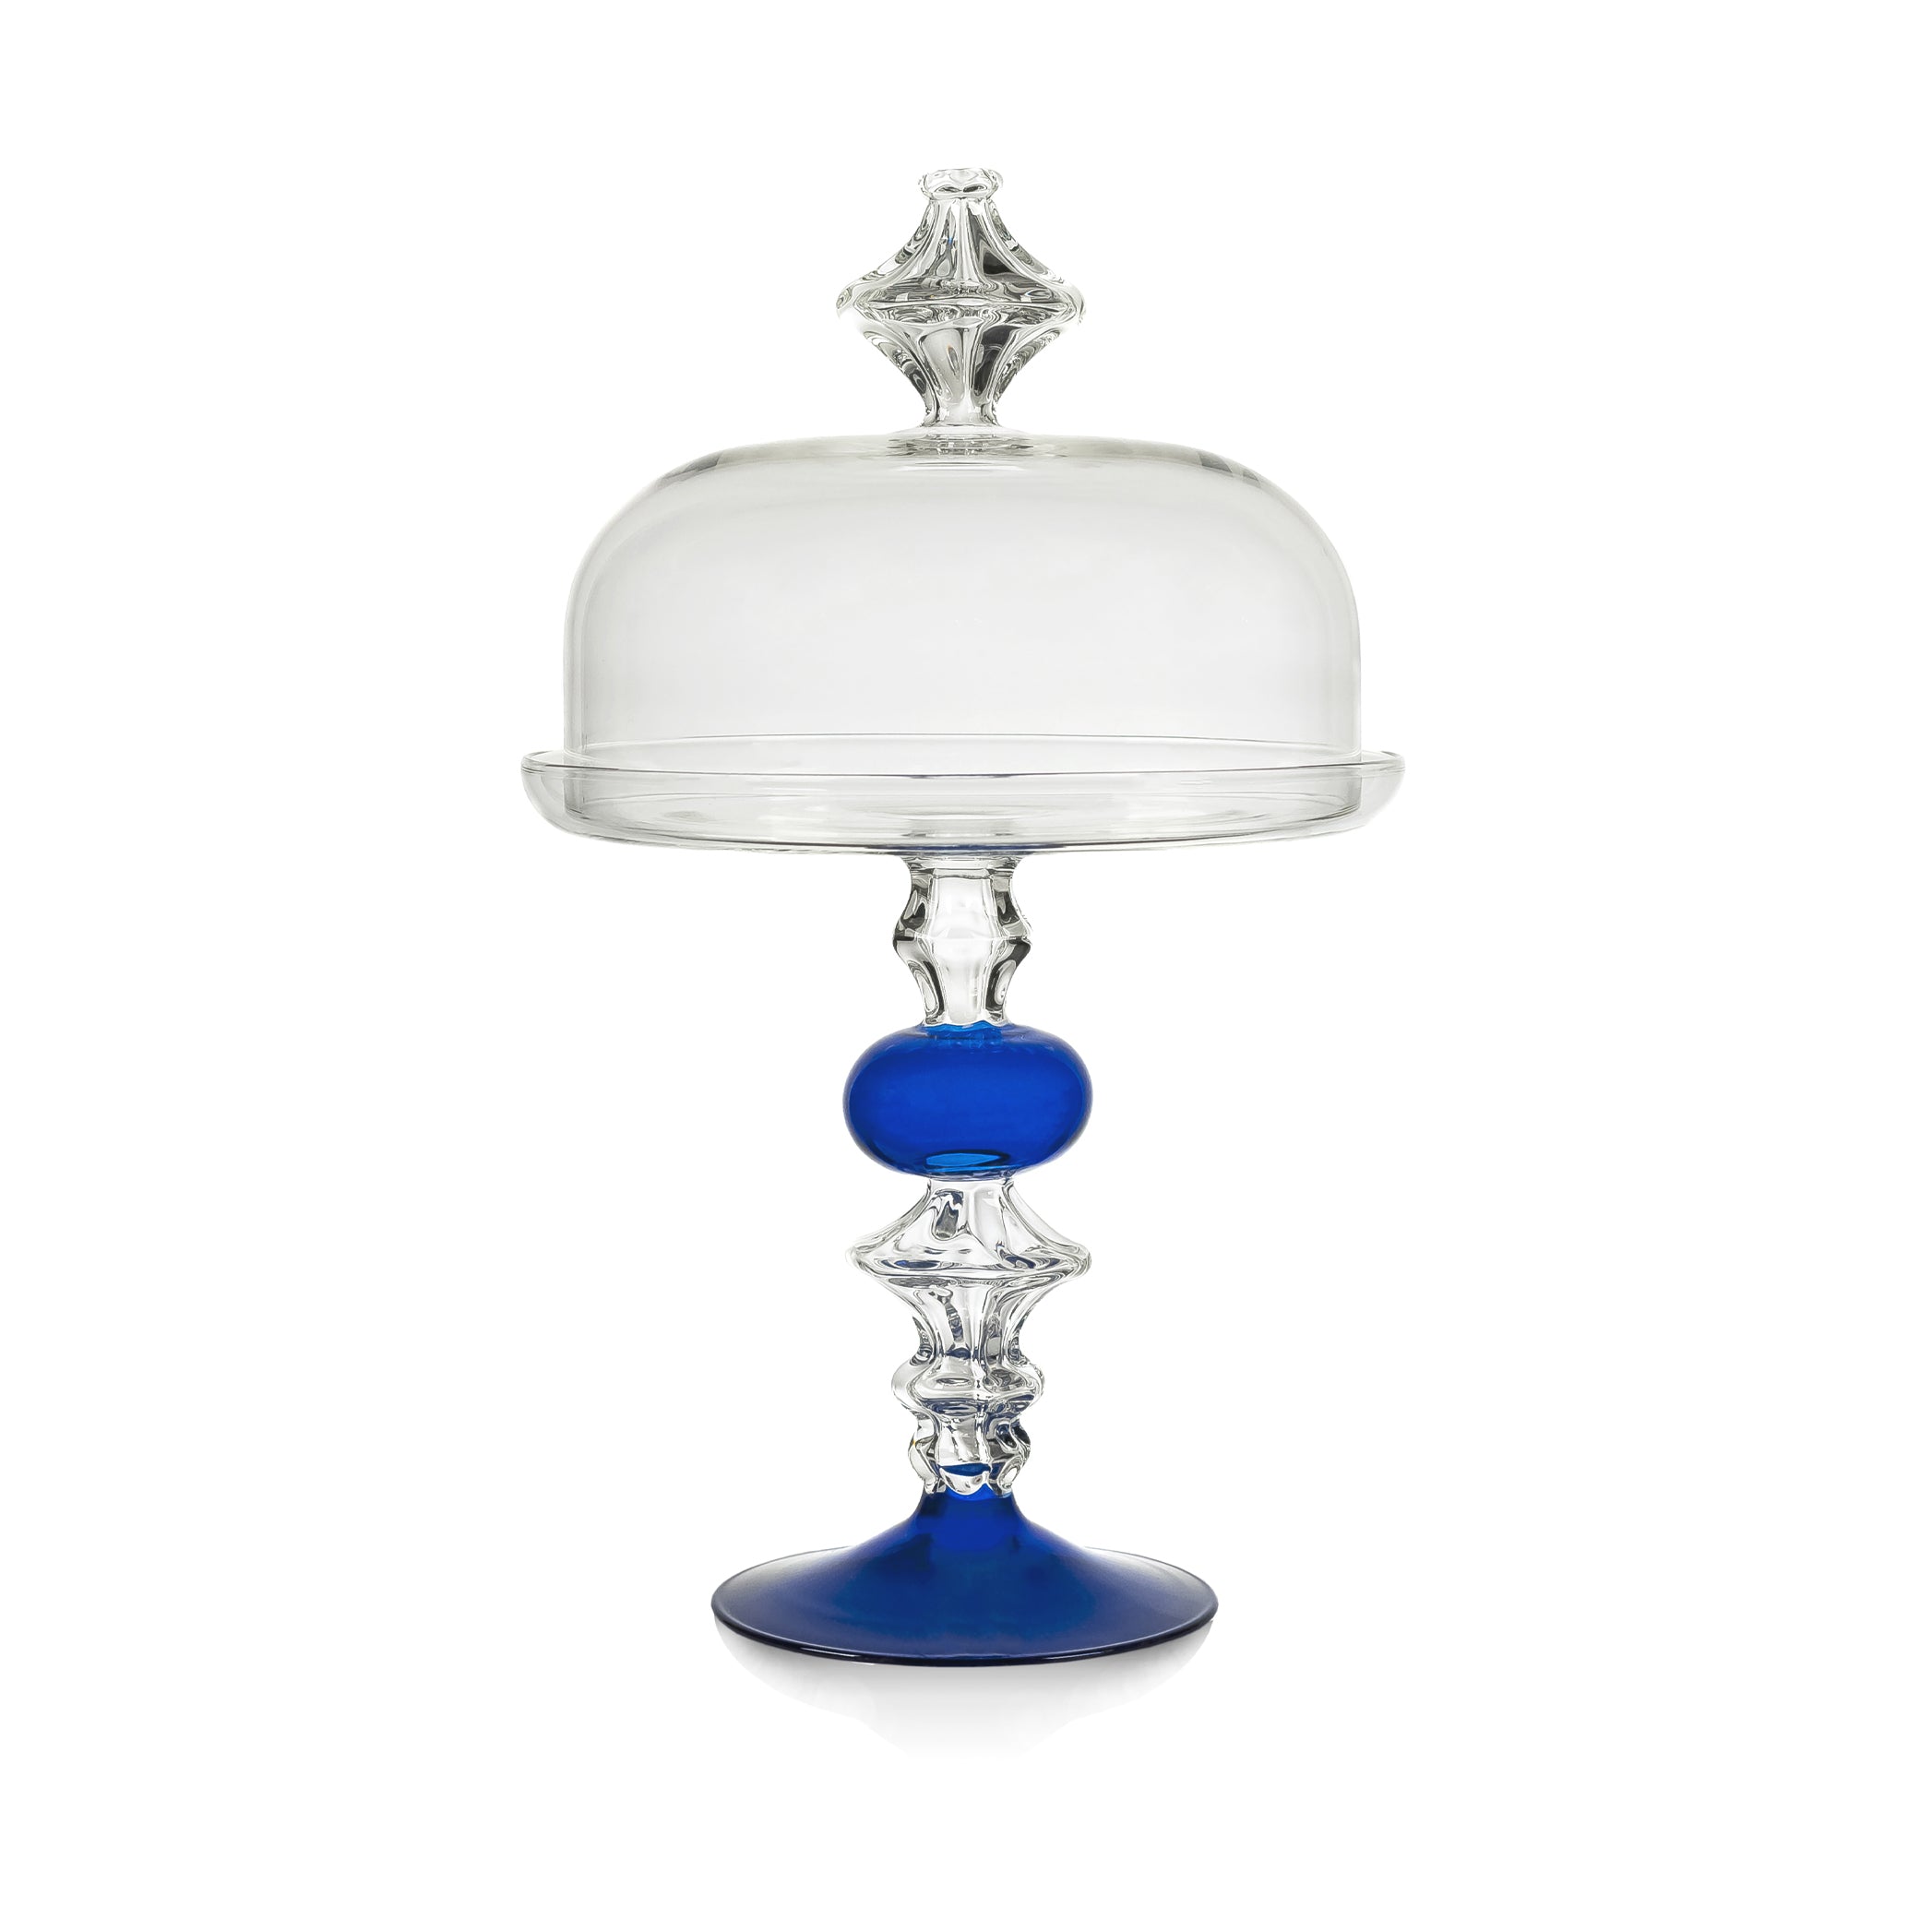 Lucia Cake Stand and Dome in Blue, 42cm x 23cm